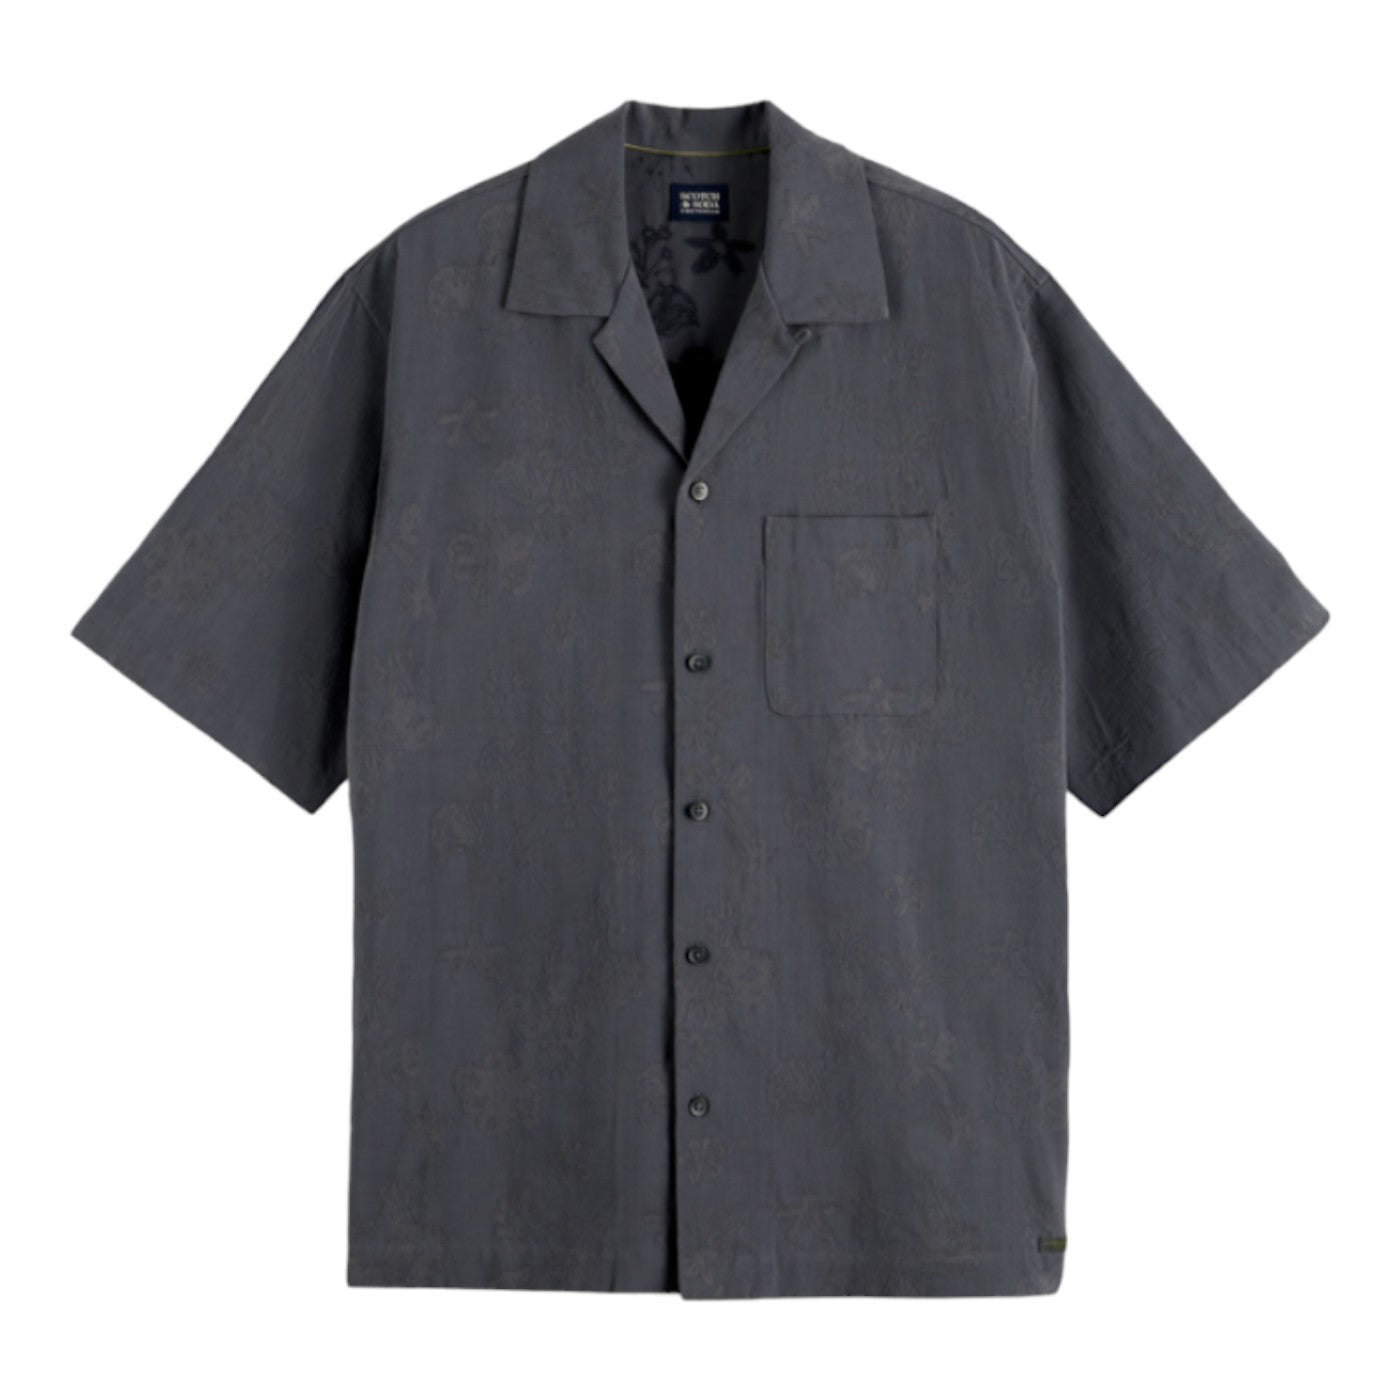 Grey short sleeve button down with front pocket